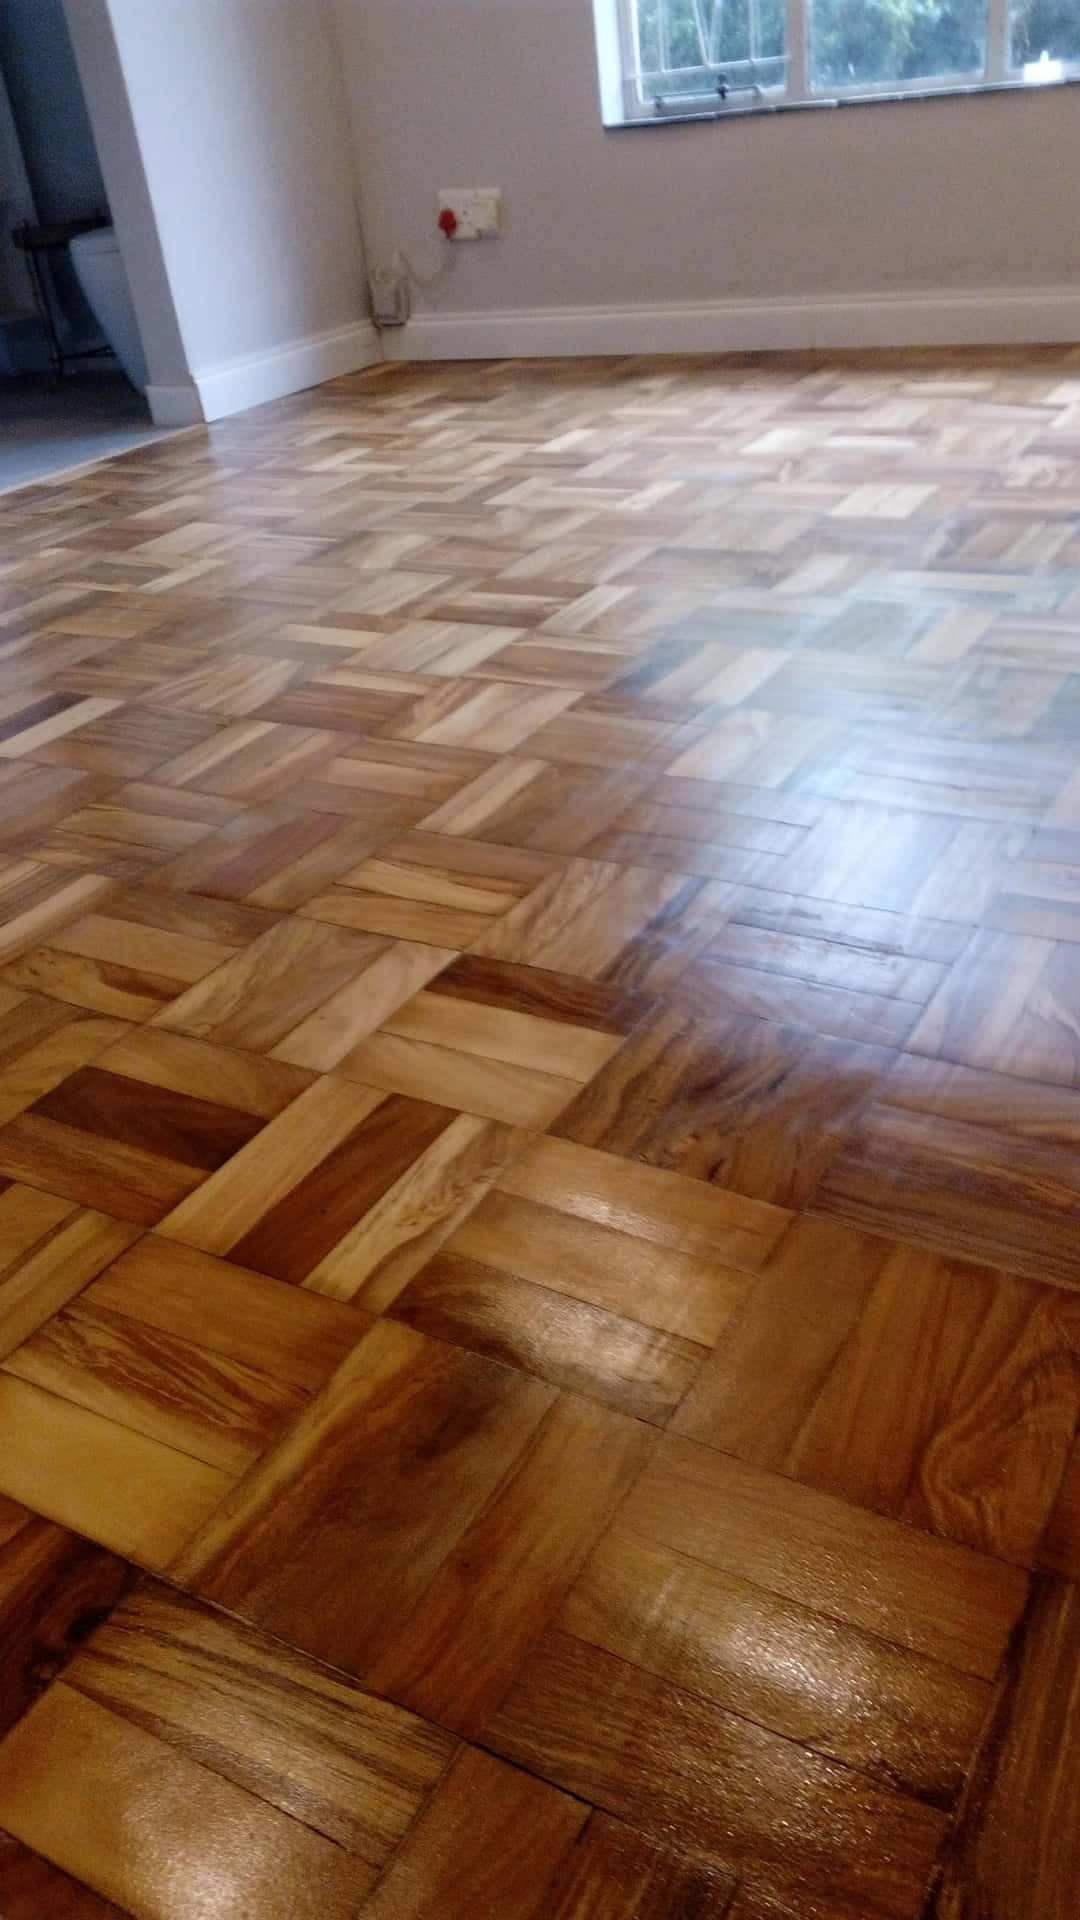 A Room With A Wooden Floor That Has Been Cleaned